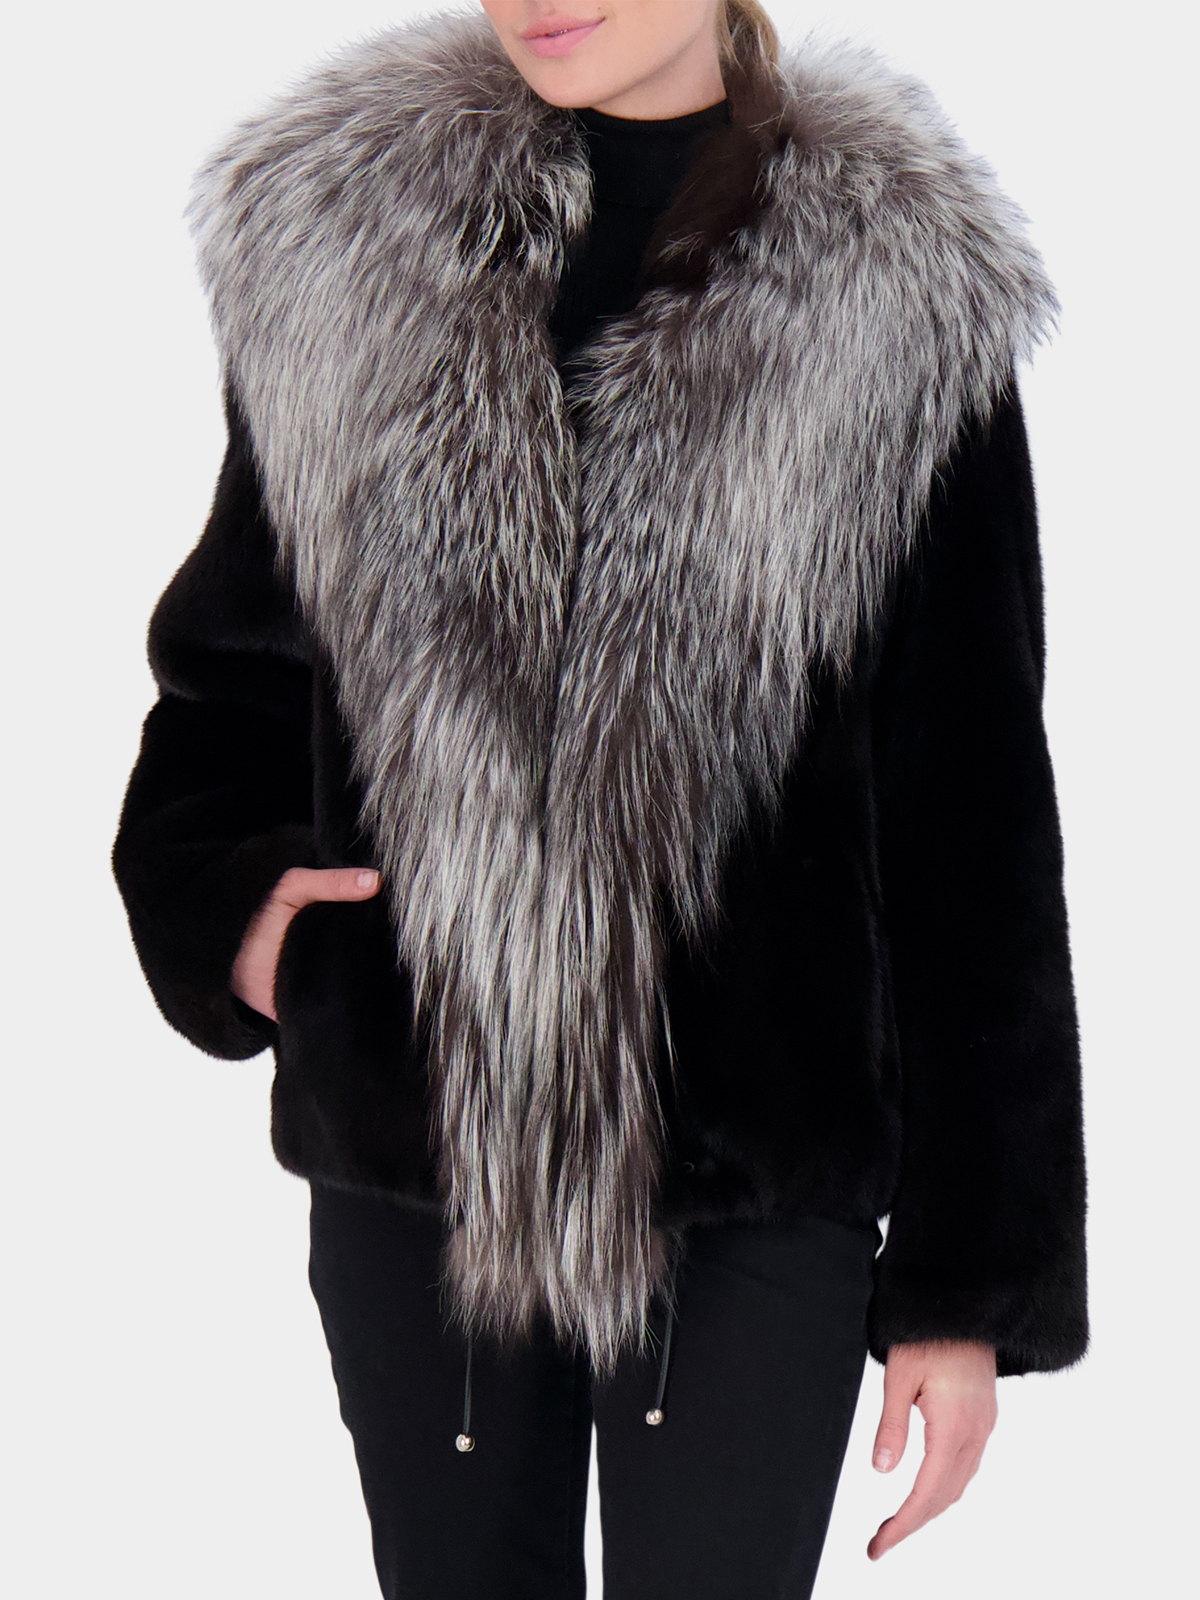 Black Mink Fur Jacket With Silver Fox Collar Women S Small Day Furs